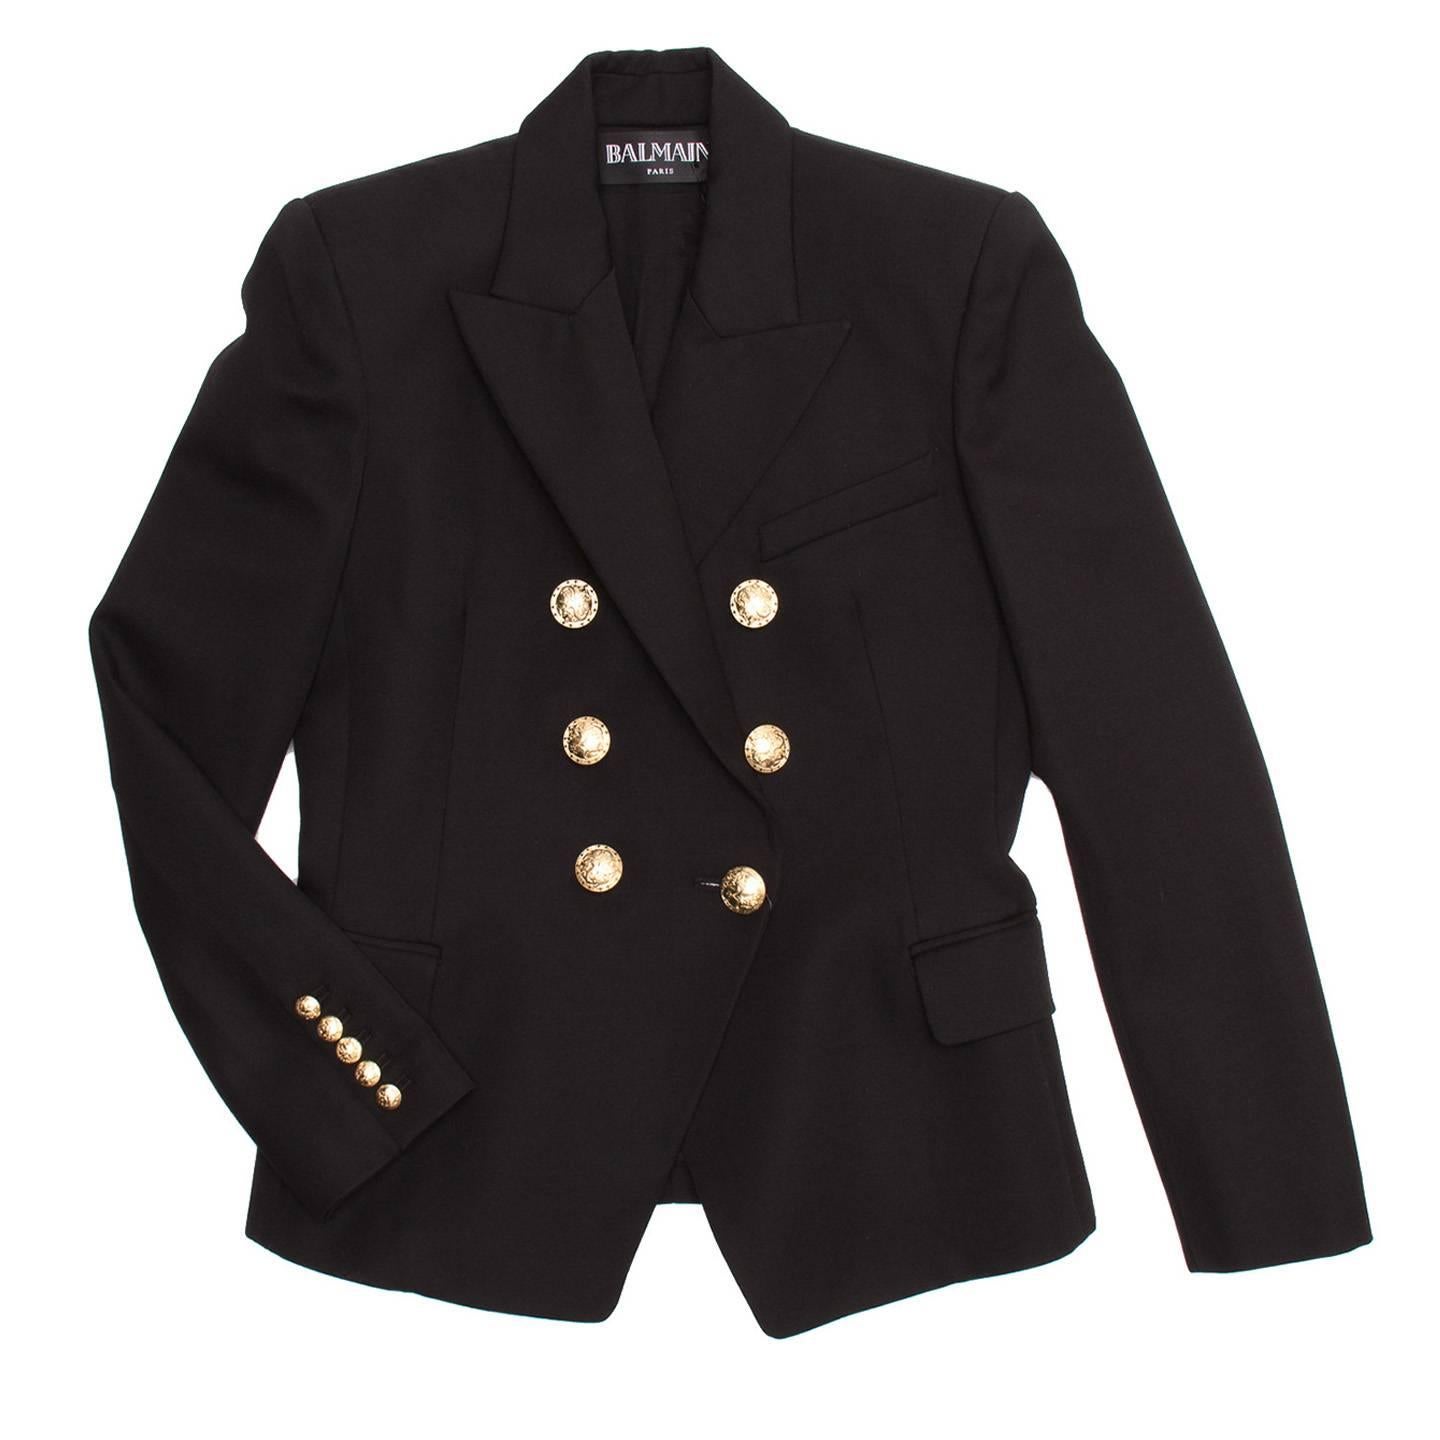 Double breasted black tailored wool coat with gold ornate buttons. Peaked lapels with handkerchief pocket at front. 5 rows of buttons at back cuff and flap pockets at the sides. New with tags.

Size  44 French sizing

Condition  Excellent: never